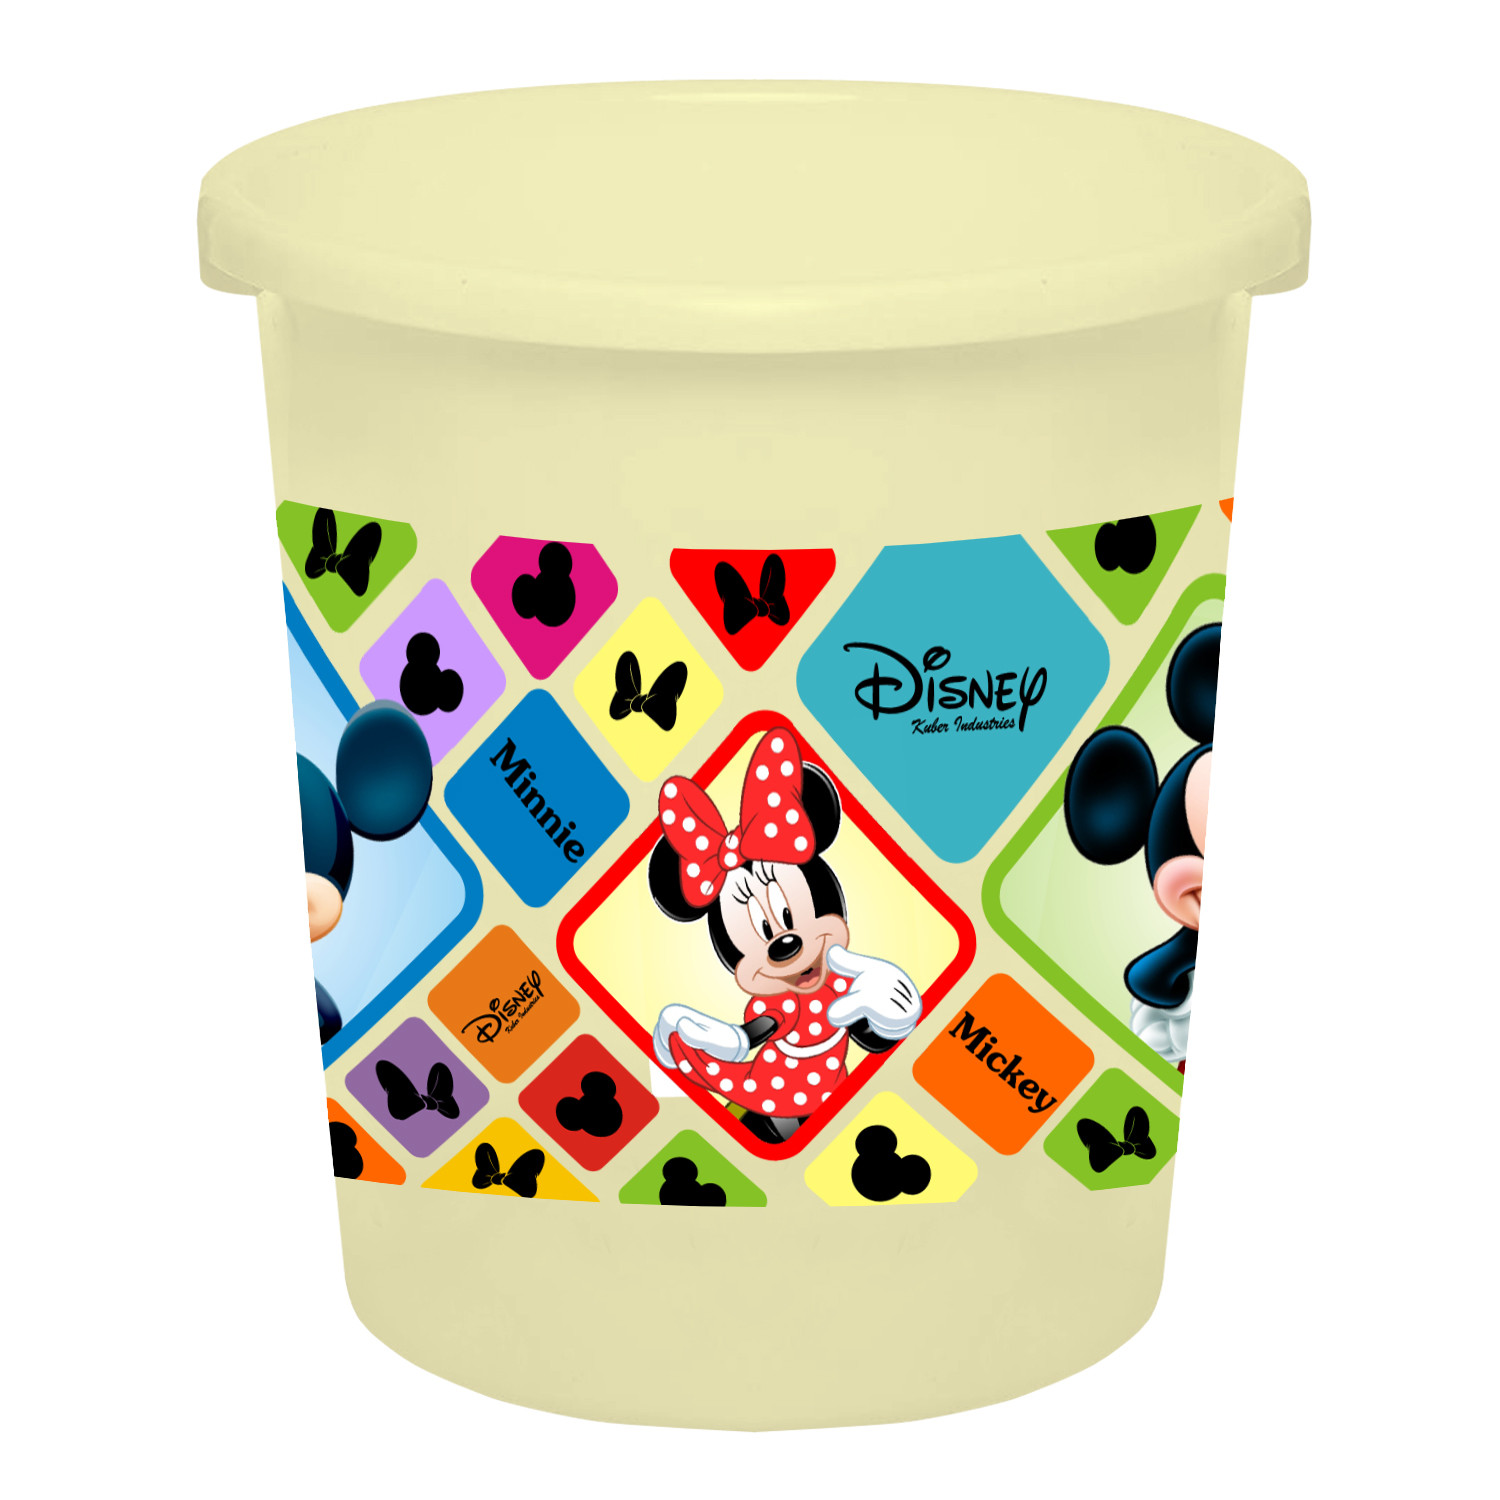 Kuber Industries Disney Mickey Minnie Print Plastic 3 Pieces Garbage Waste Dustbin/Recycling Bin for Home, Office, Factory, 5 Liters (Cream & Blue & Black) -HS_35_KUBMART17811